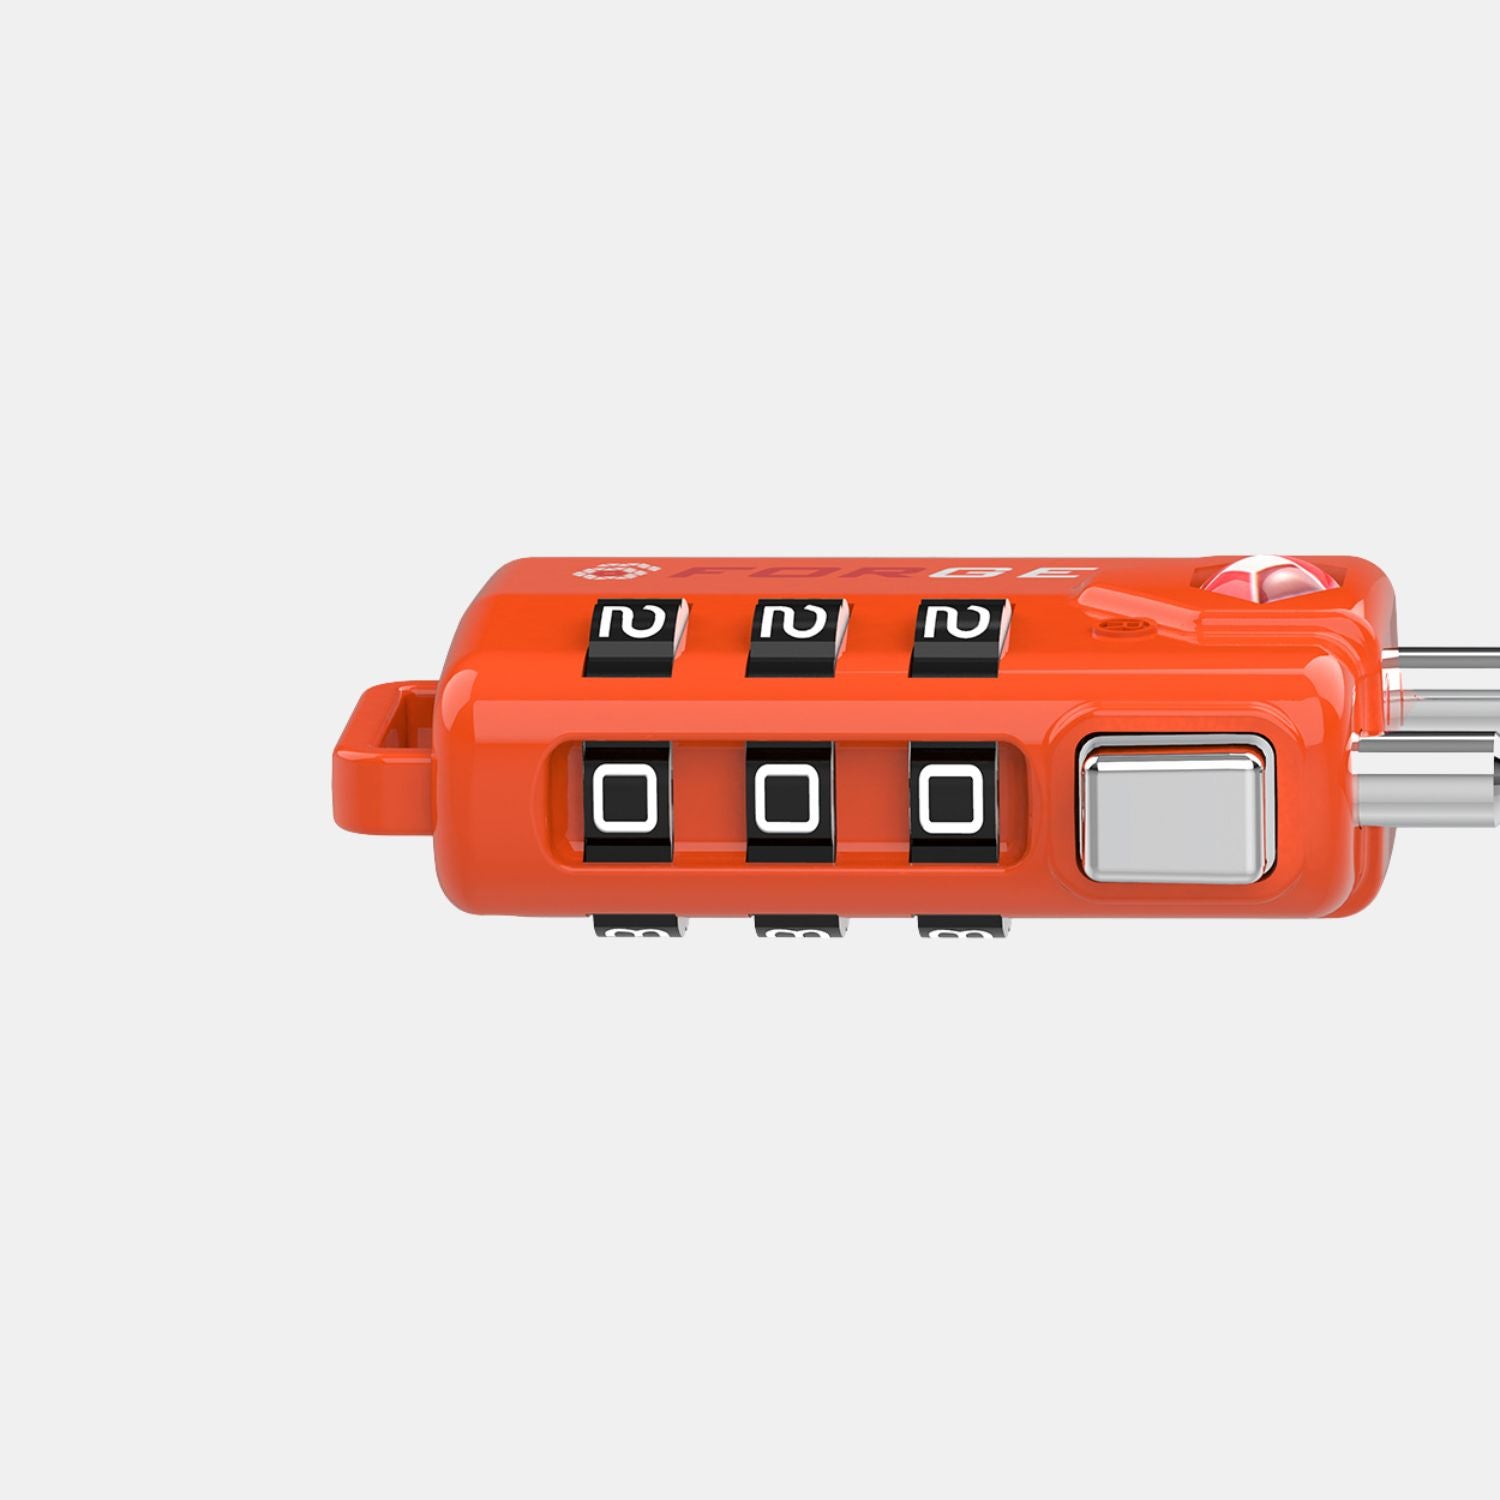 TSA Approved Cable Luggage Lock with Easy-to-Read Dials, Orange 4 Locks